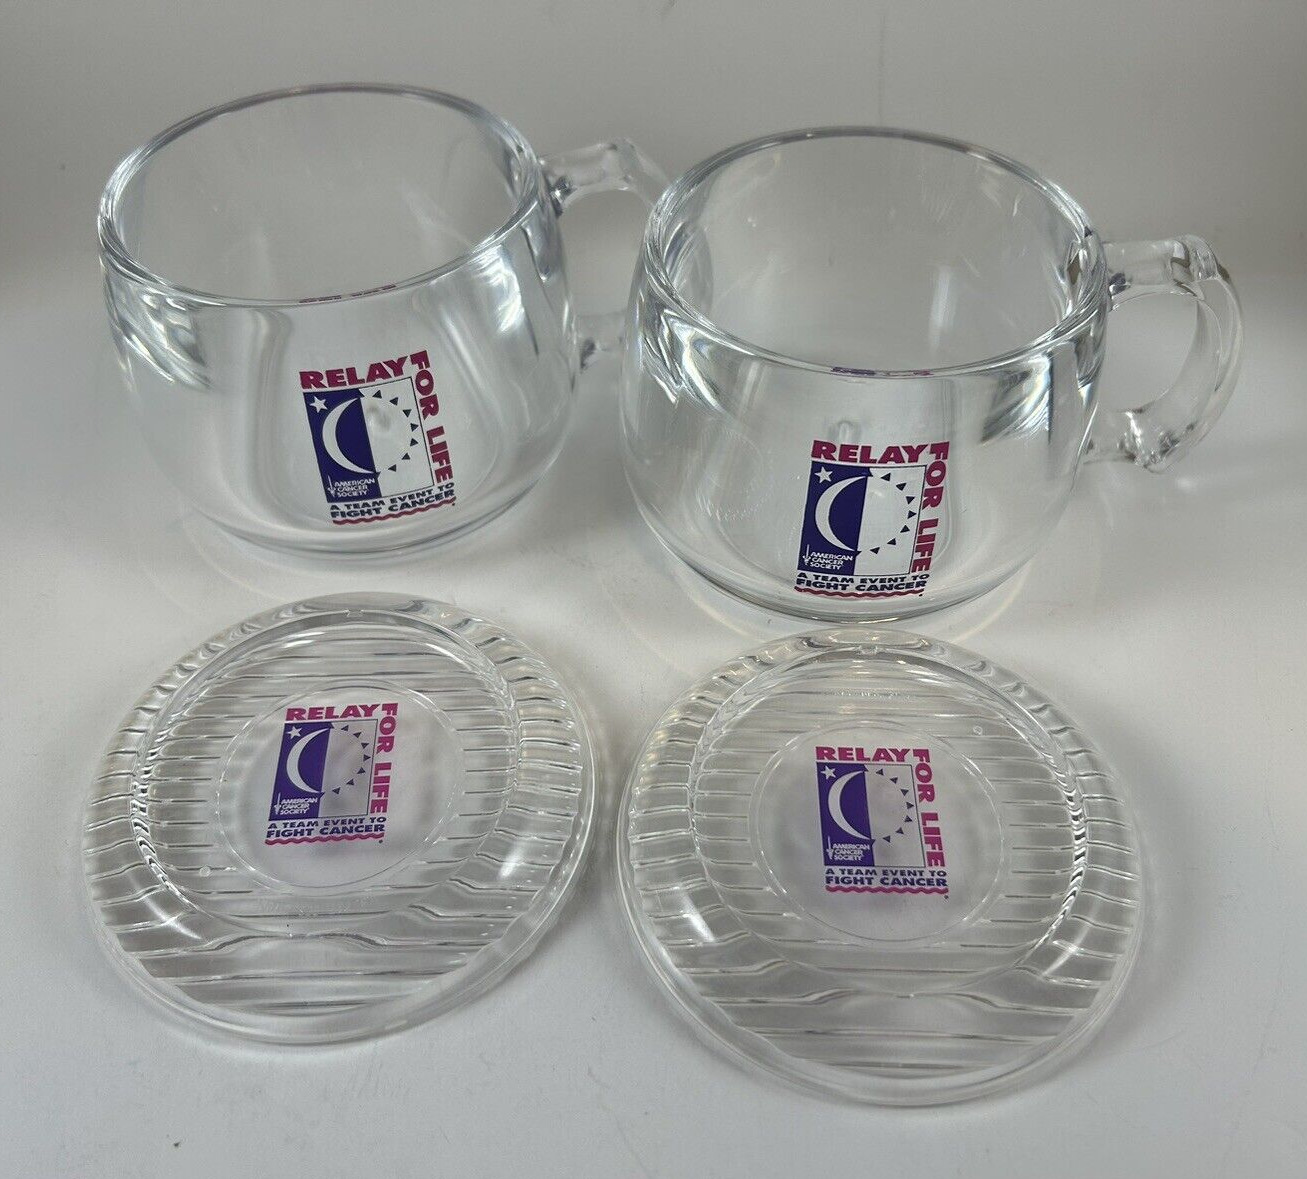 American Cancer Society Relay for Life Acrylic Cups Set of 2 with Lids Saucers